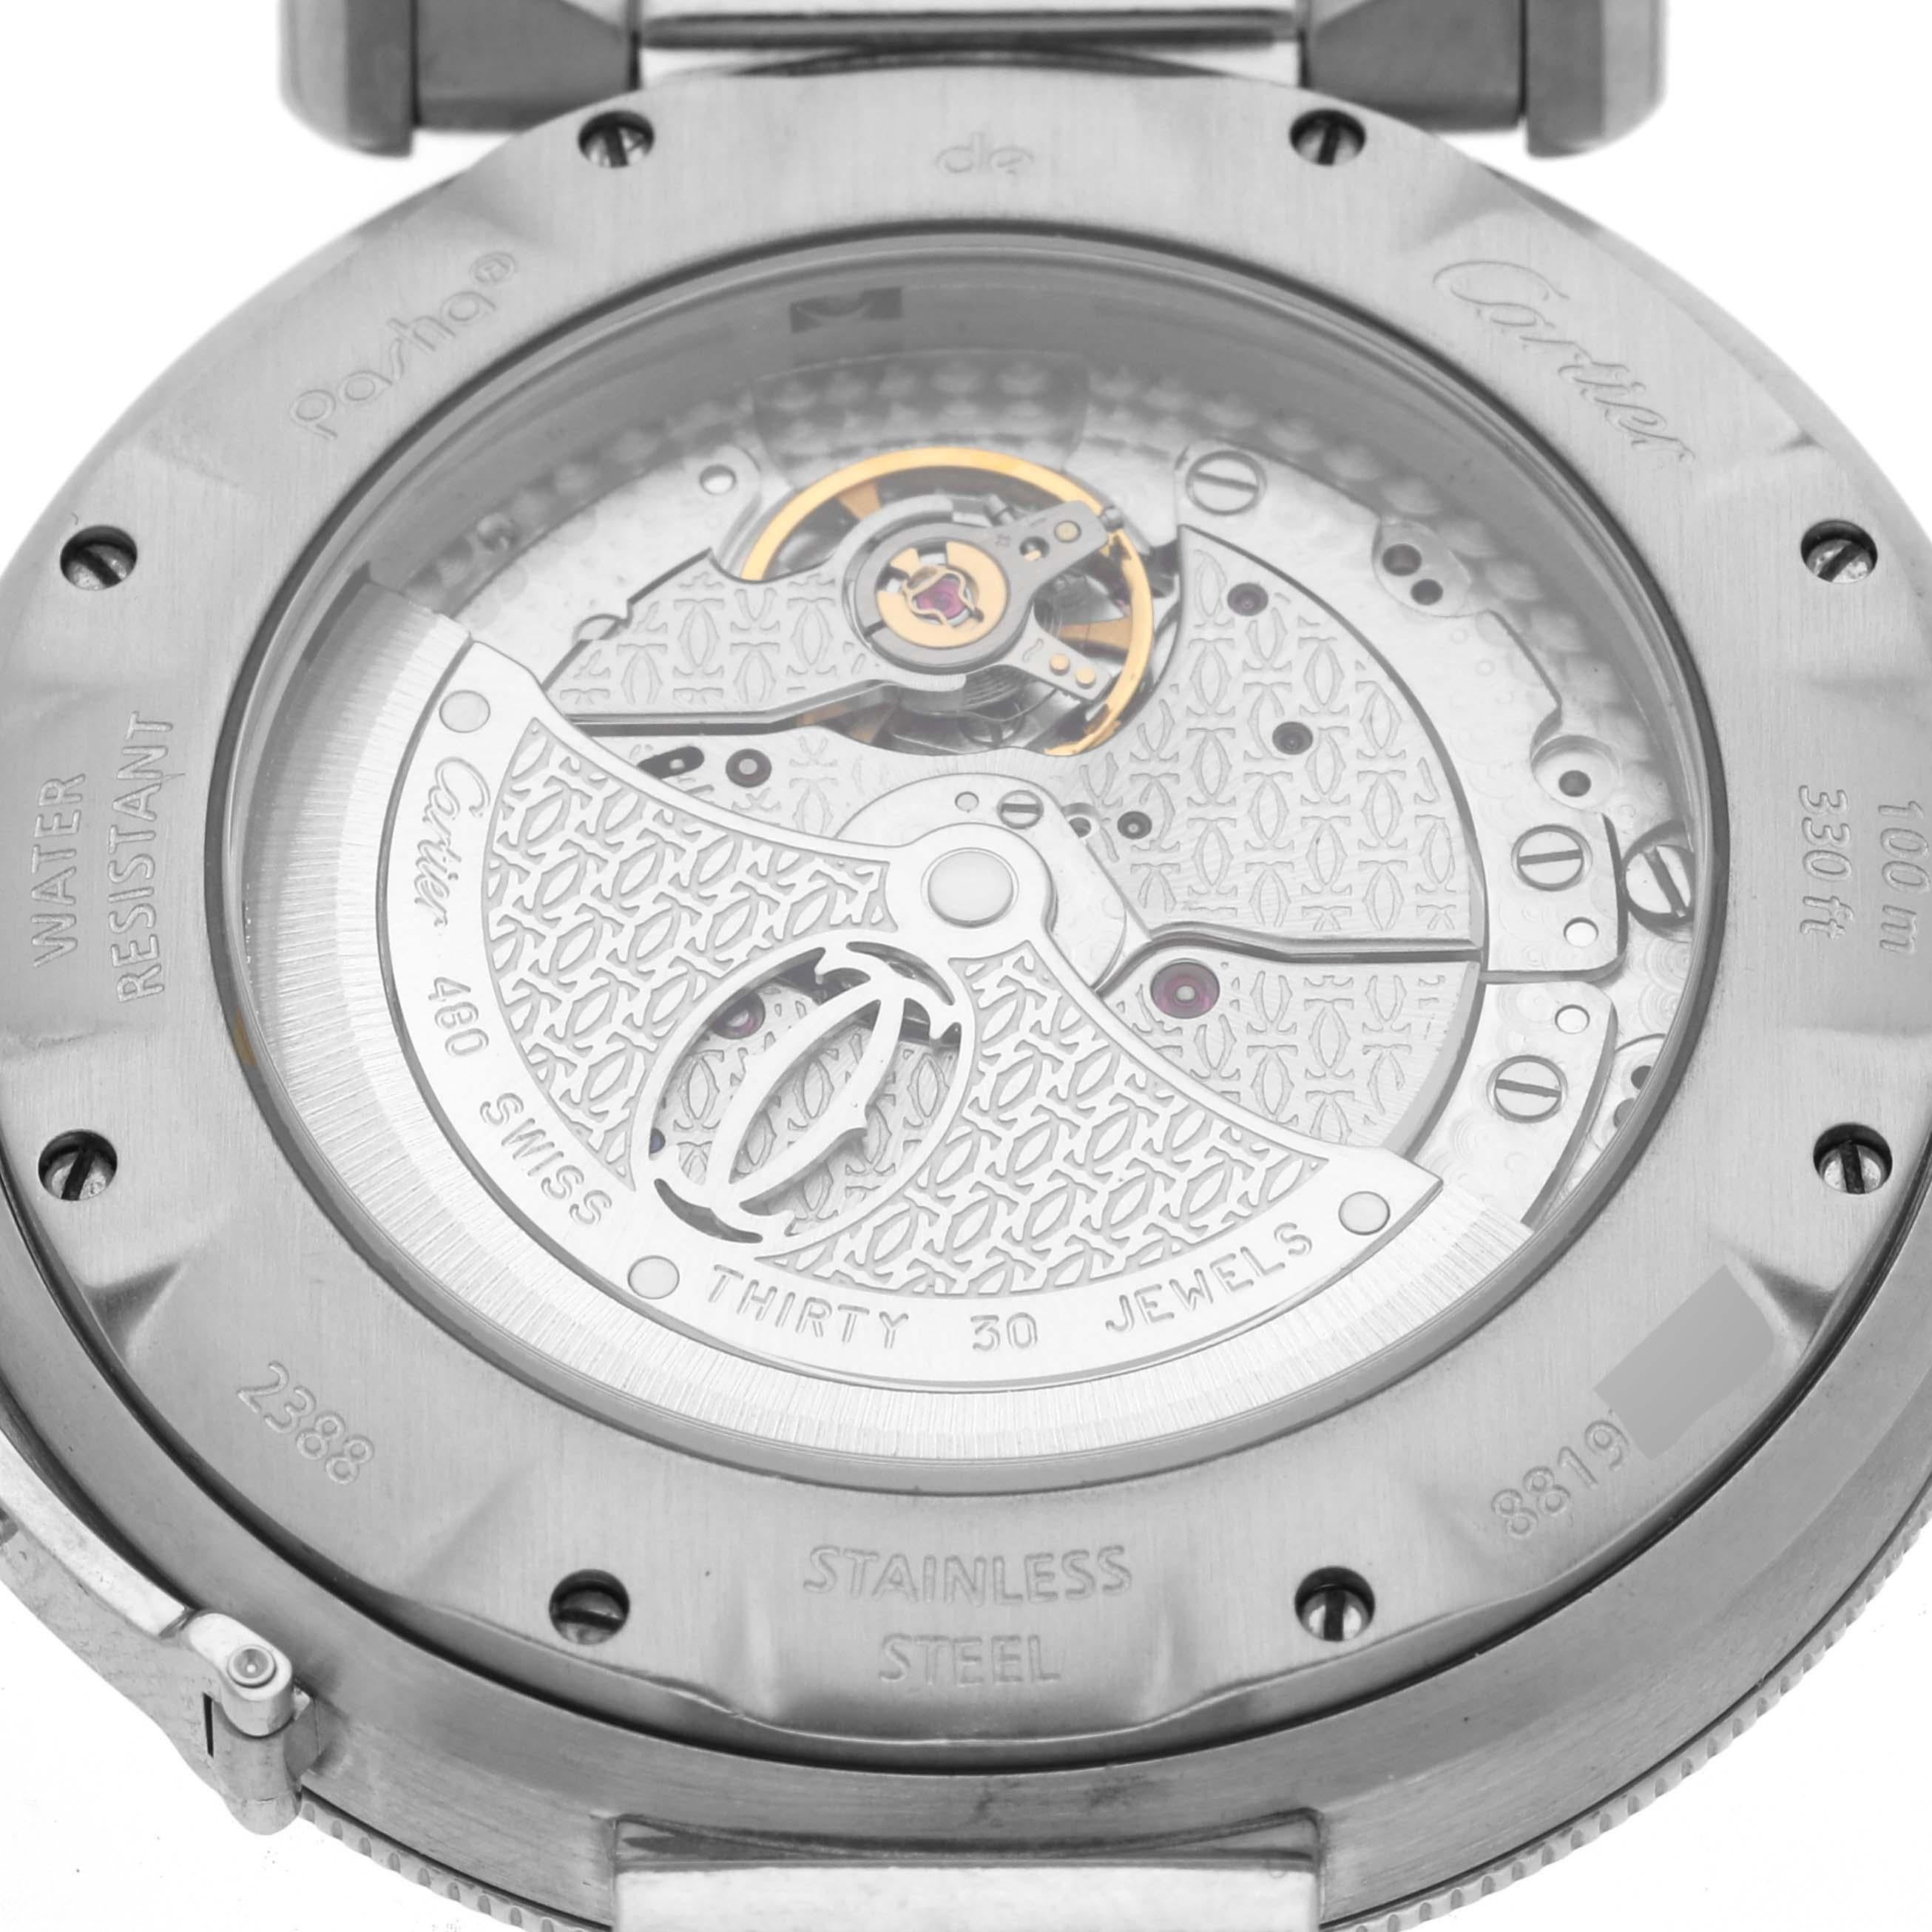 Cartier Pasha Power Reserve Silver Dial Steel Mens Watch W31037H3. Automatic self-winding movement. Round three-body stainless steel case 38.0 mm in diameter. Transparent exhibition sapphire crystal caseback with 8 screws. Inclined bezel,